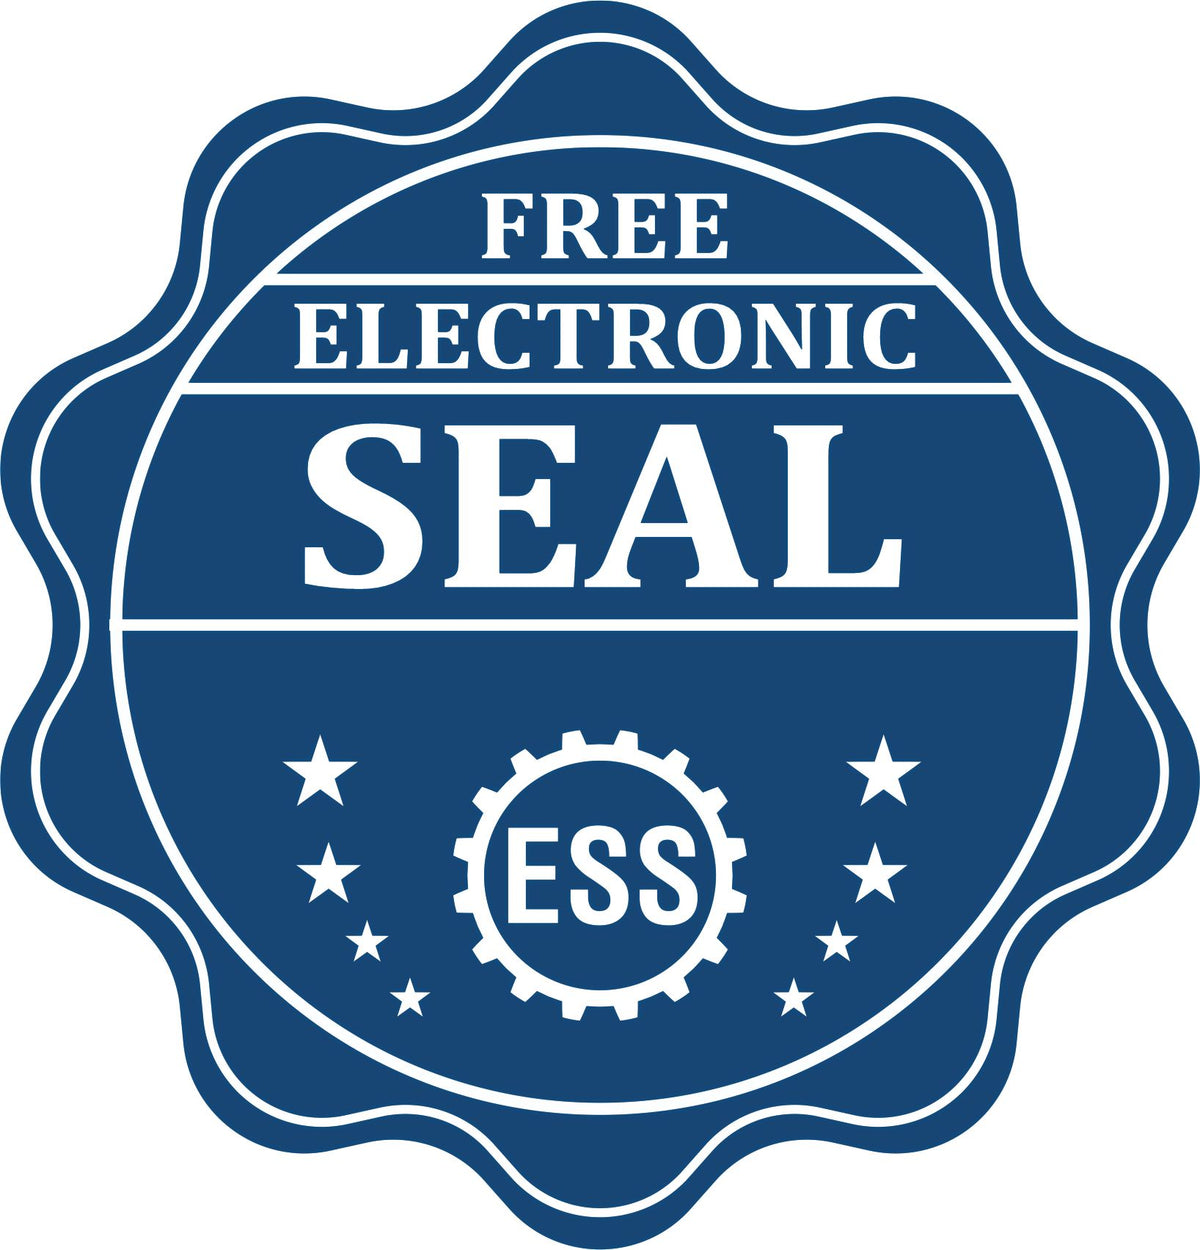 A badge showing a free electronic seal for the Slim Pre-Inked Louisiana Landscape Architect Seal Stamp with stars and the ESS gear on the emblem.